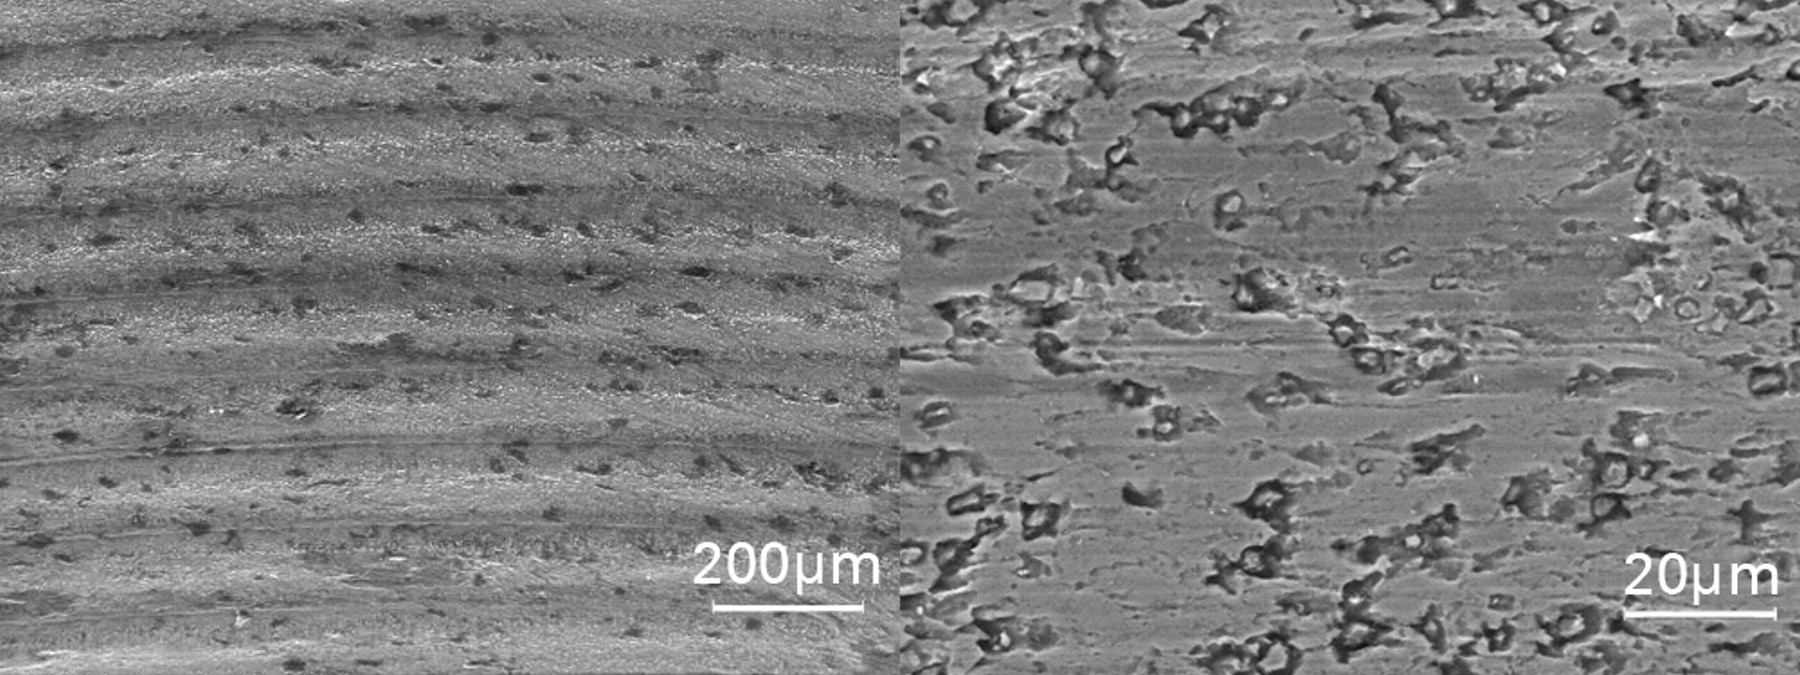 Fig. 5 
          Scanning electron microscopy (SEM) images
of a taper that has experienced greater wear, at the same level
of magnification as in Figure 4 (left), showing that the peaks and
troughs caused by the impression of the machining grooves have been
sheared off, leading to significant material loss, and at a higher
magnification (right), showing the formation of pits with inclusion
bodies, probably as a result of mechanical wear
        